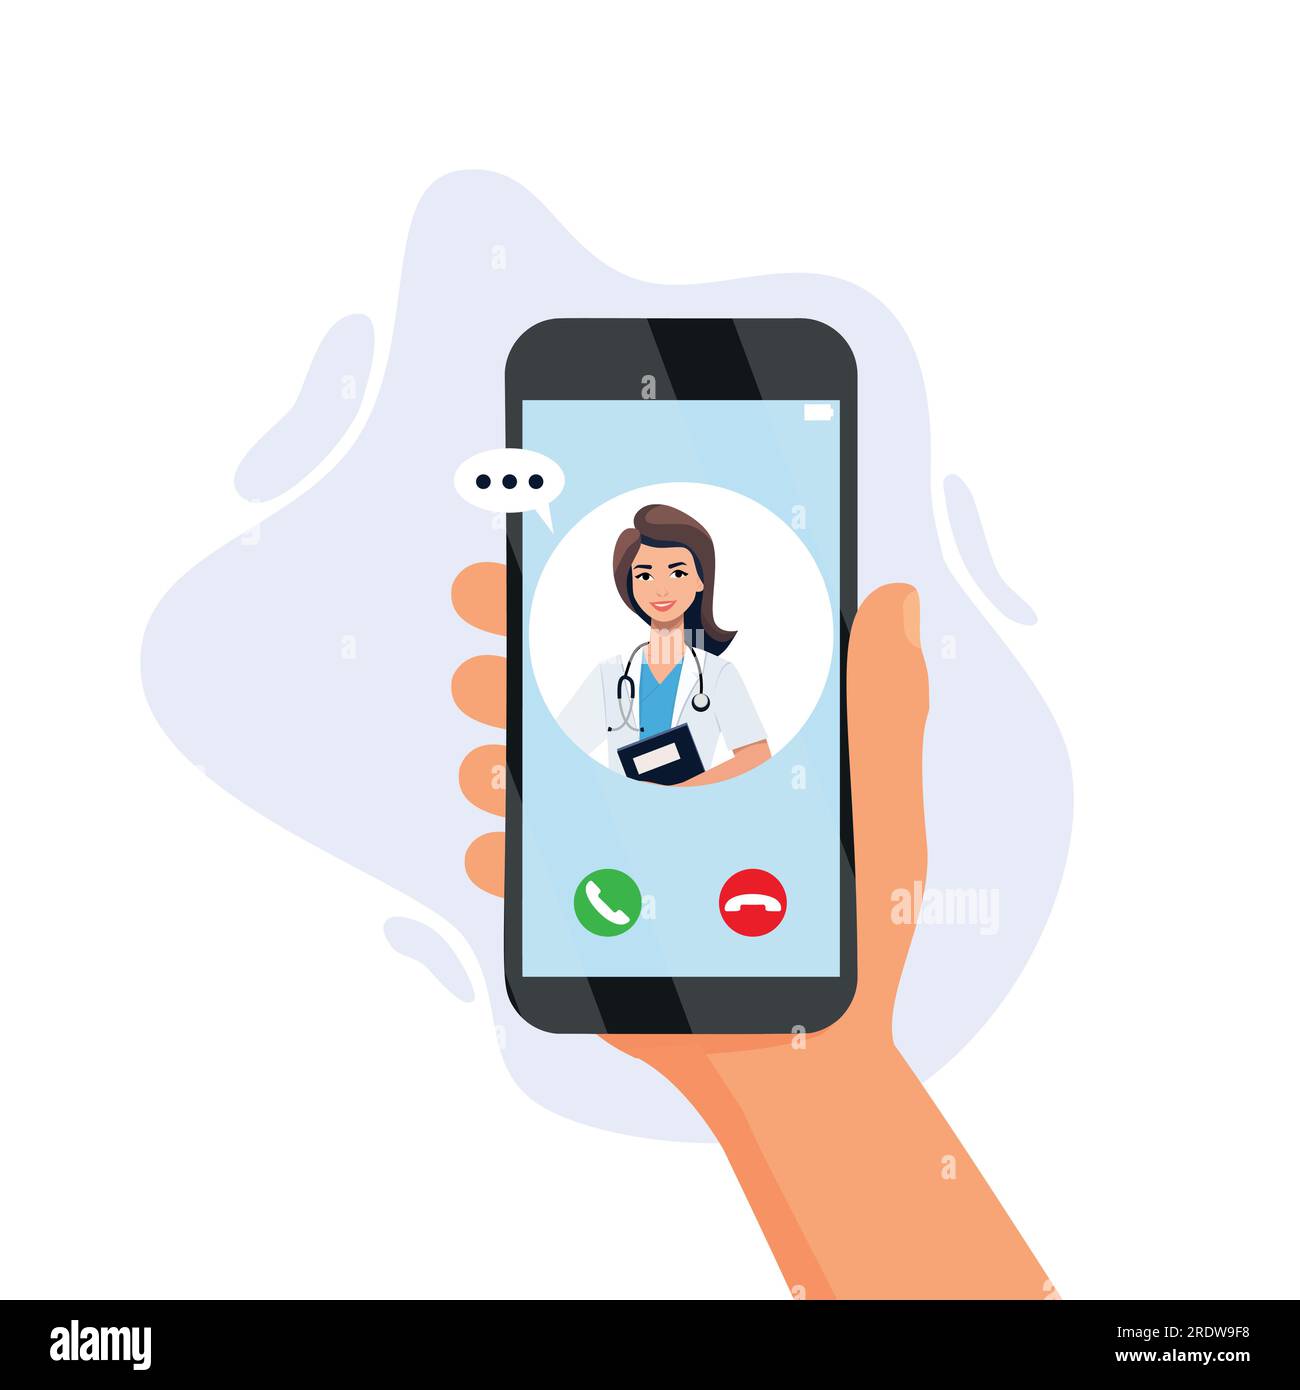 nline medicine concept vector illustration. Cartoon flat human hand holding smartphone with video call to doctor character on screen, using mobile adv Stock Vector